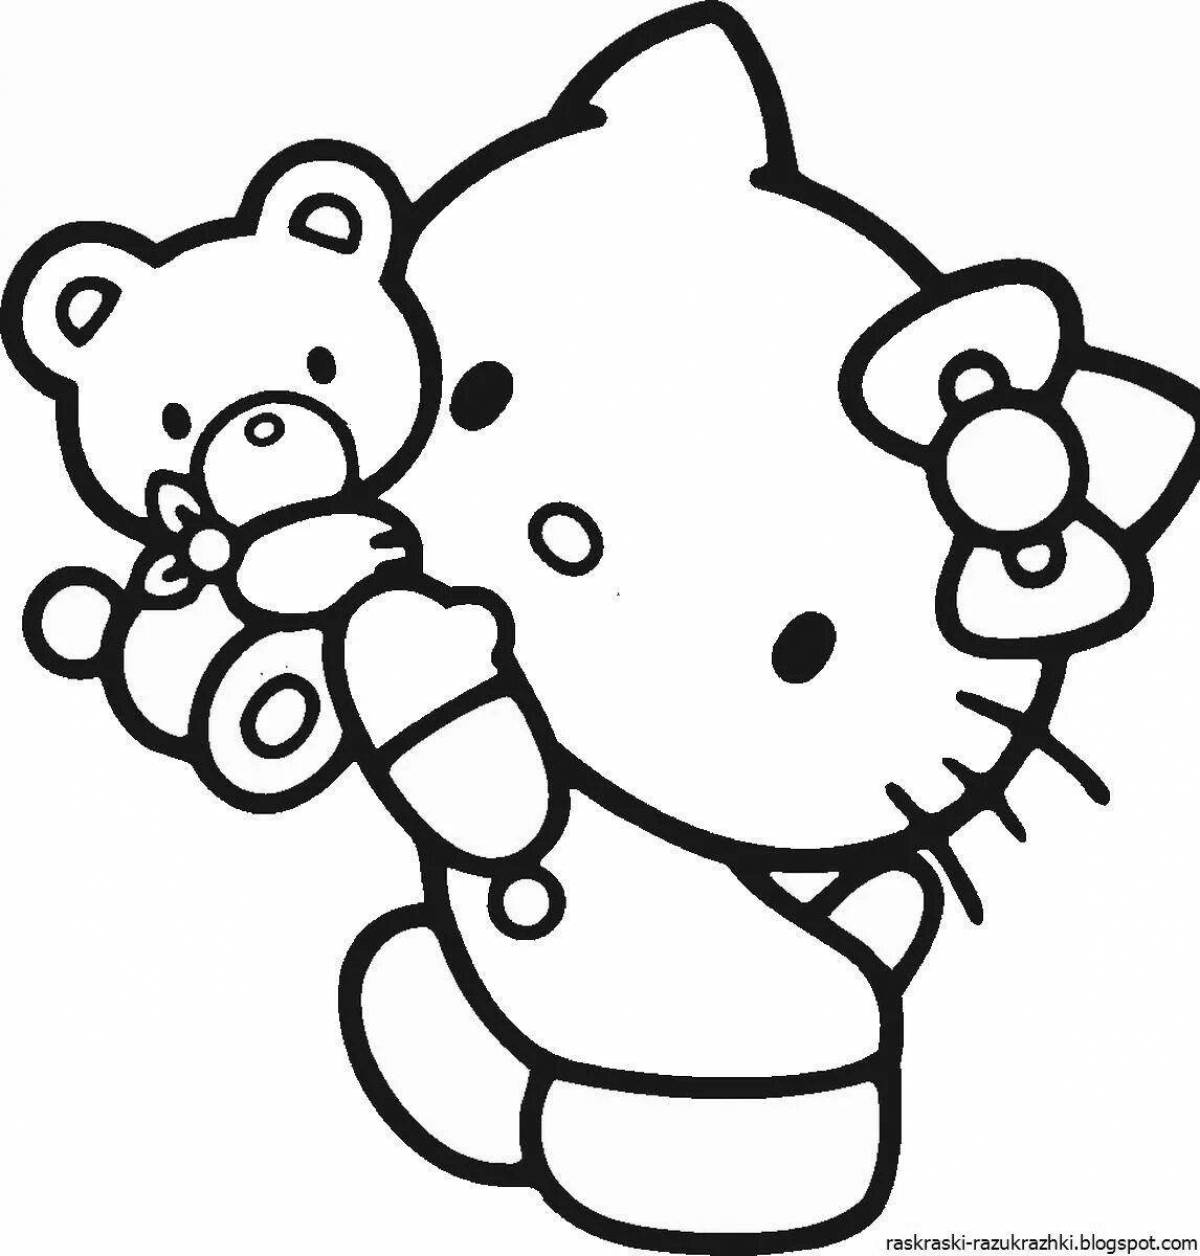 Coloring book brave teddy bear for girls